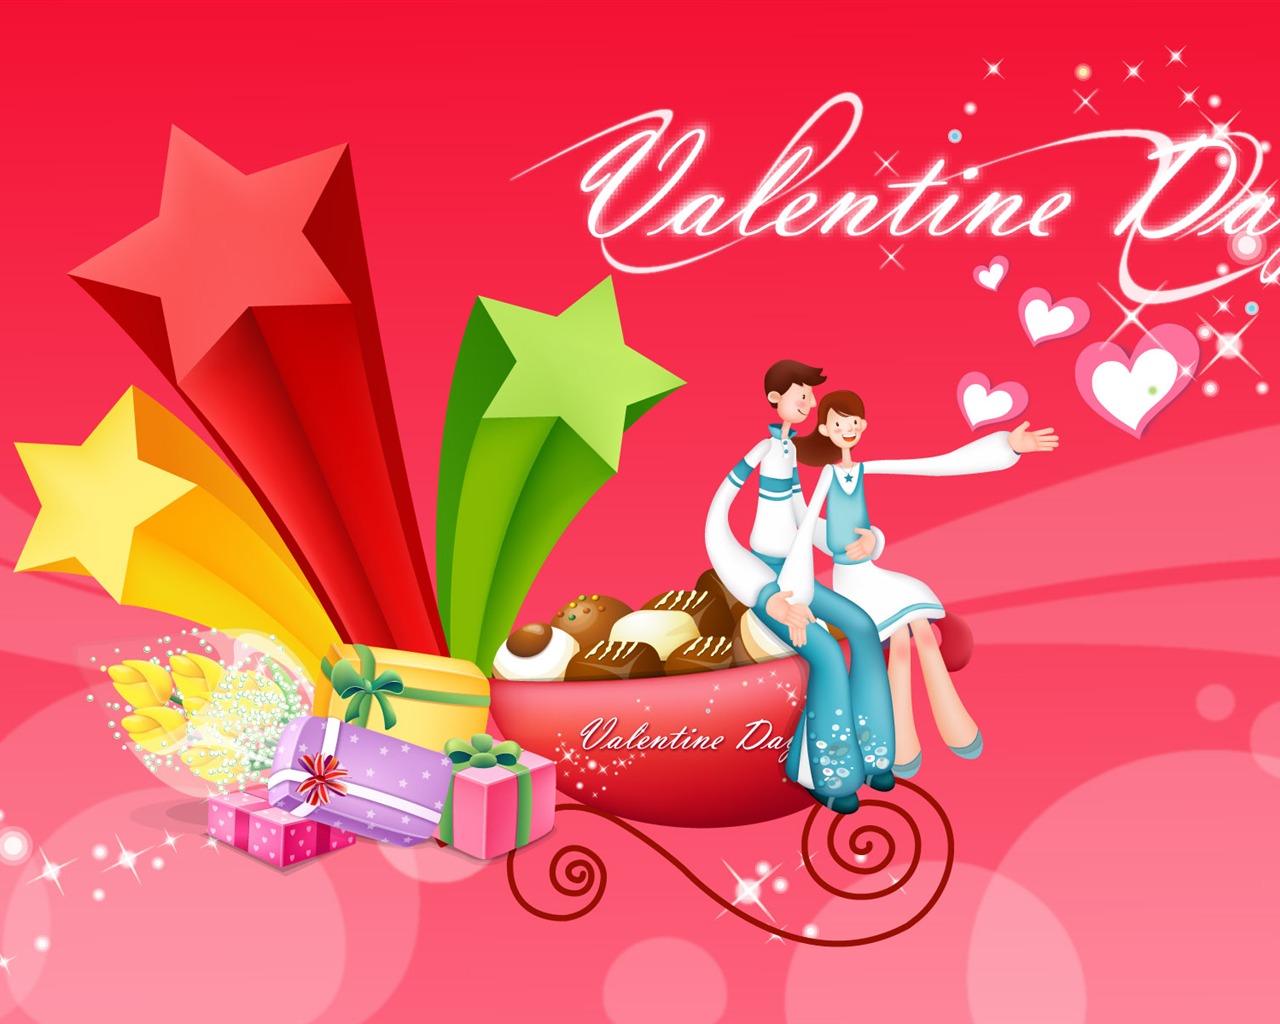 Valentine's Day Theme Wallpapers (2) #1 - 1280x1024